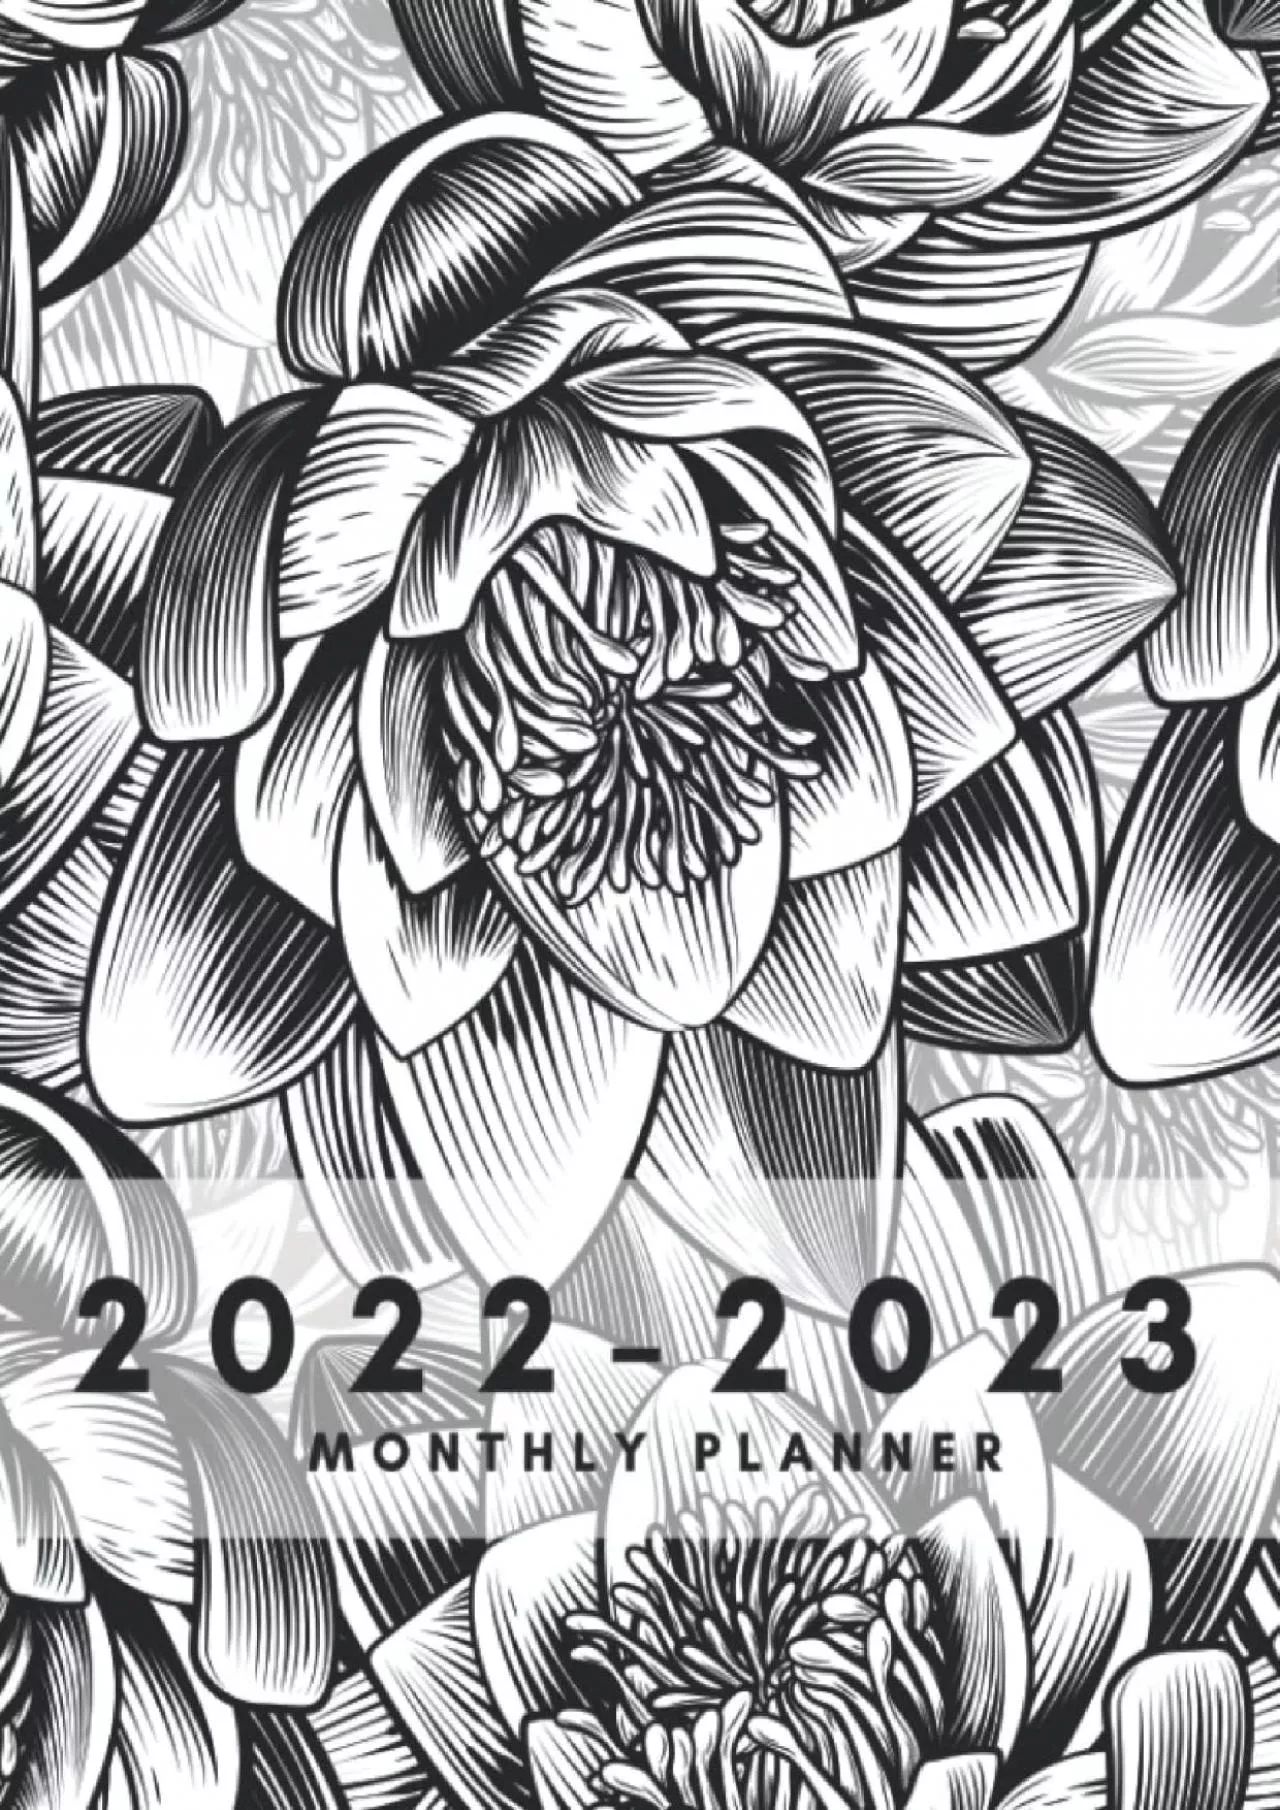 [PDF]-2022-2023 Monthly Planner: Large Two Year Monthly Calendar Planner for Work or Personal